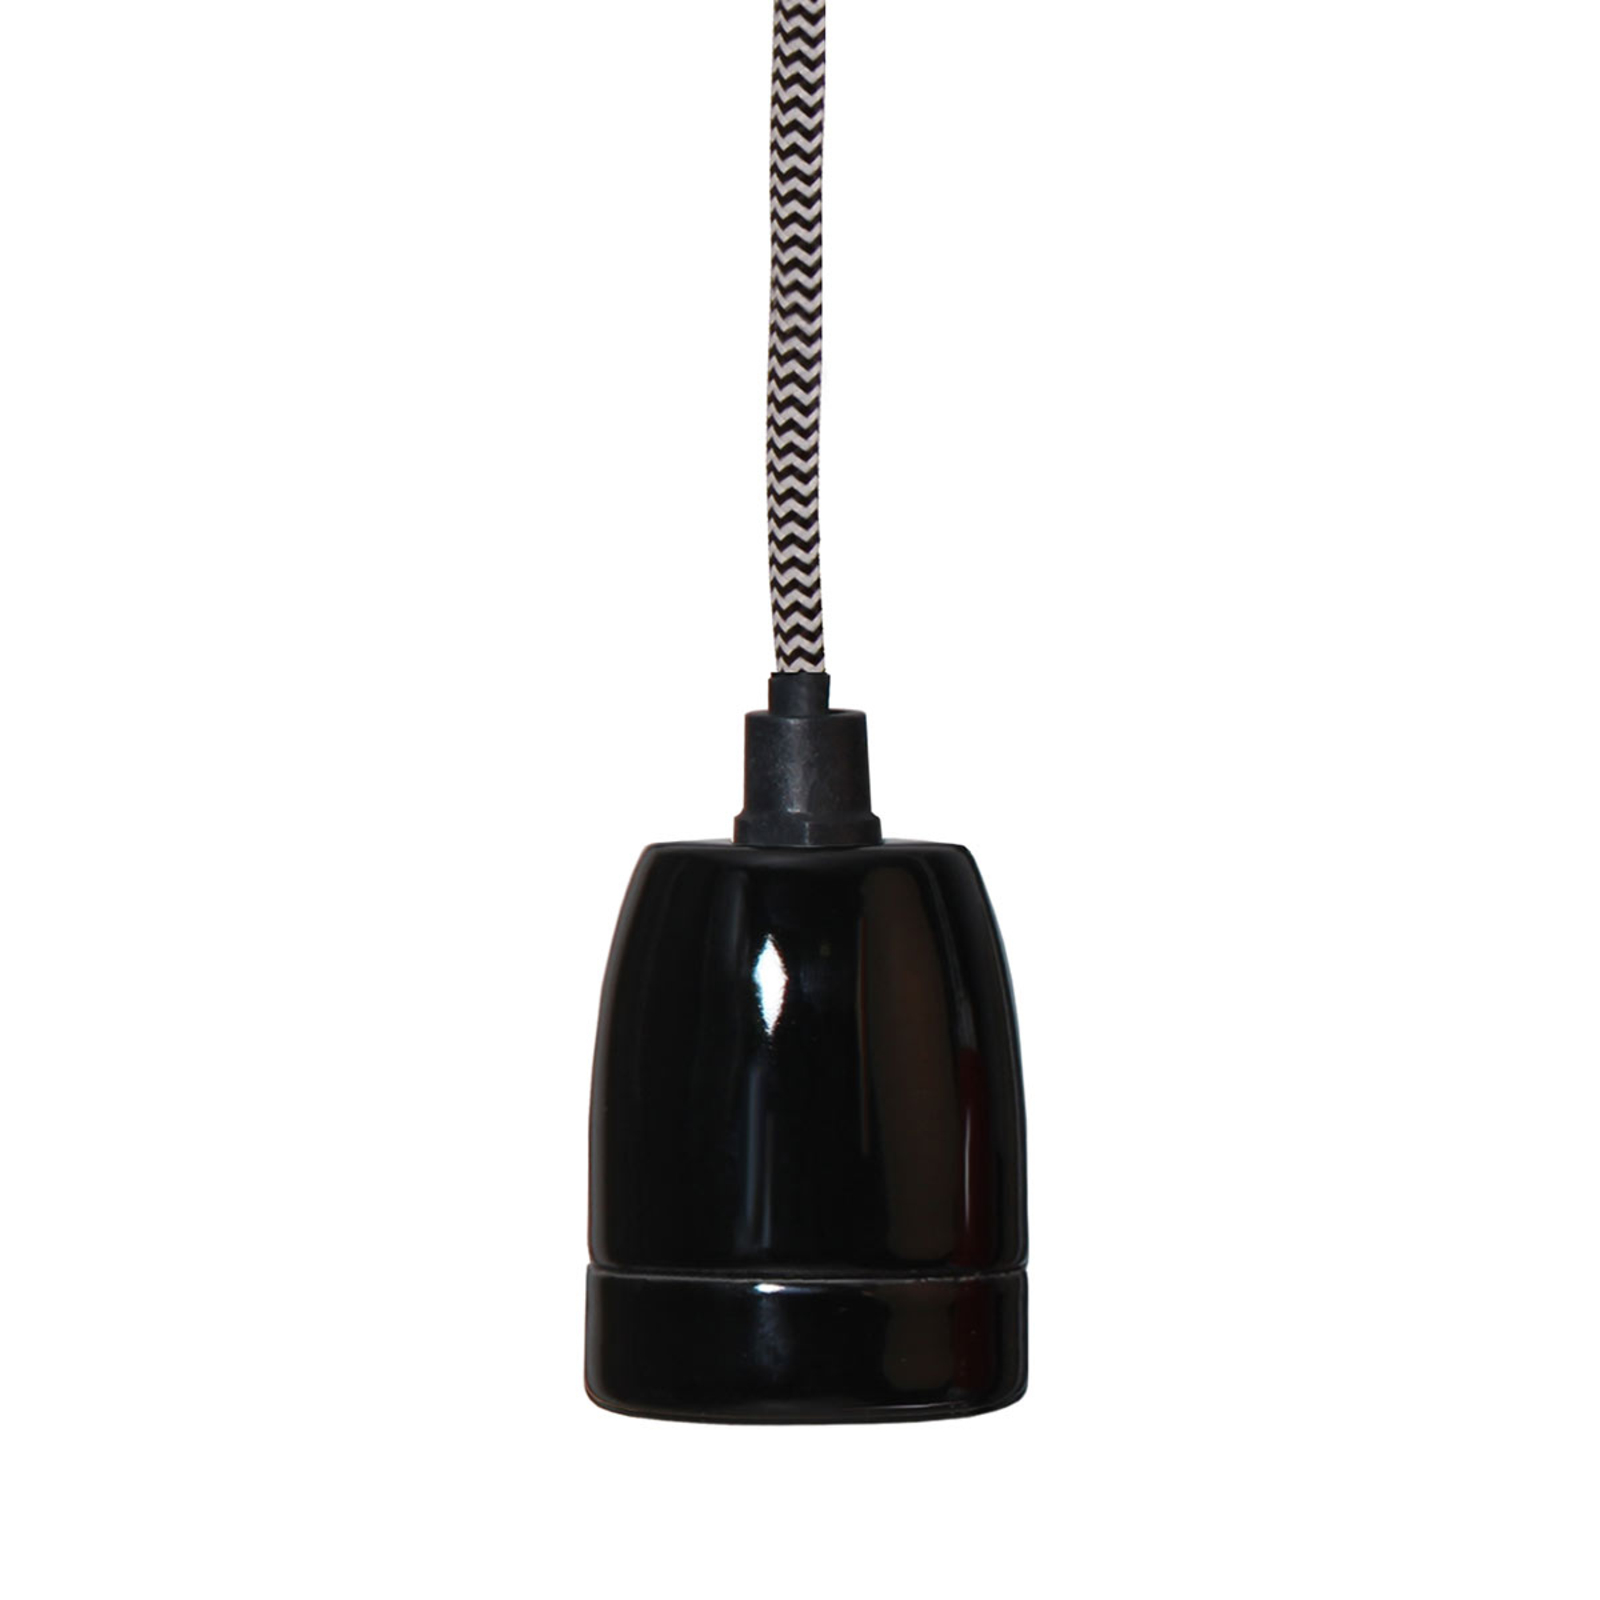 Glaze E27 socket with cable, grey